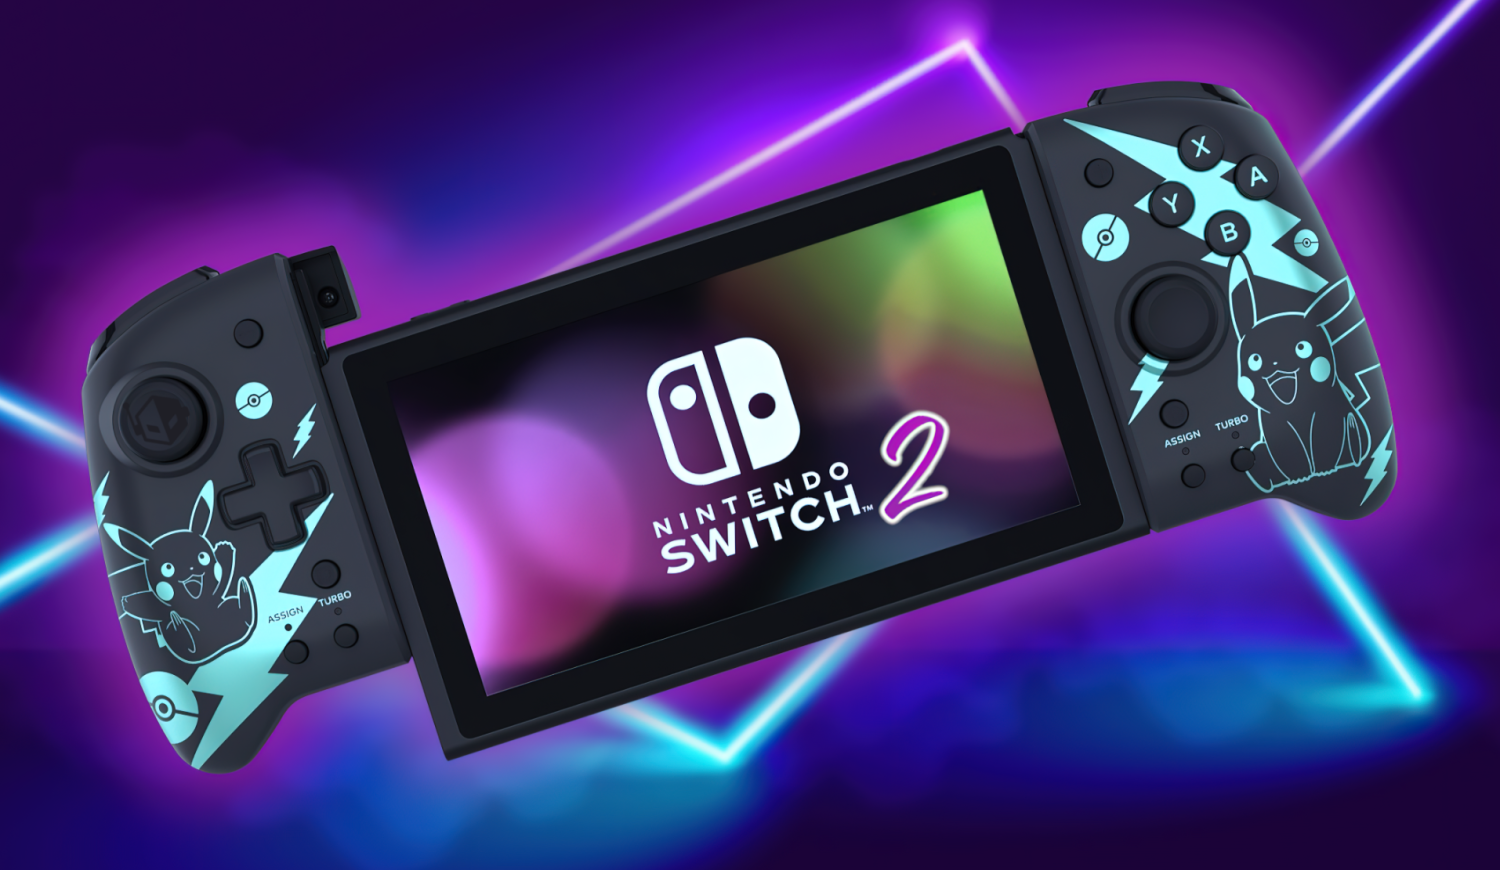 Nintendo Switch 2 specifications may have leaked revealing 3x upgrade